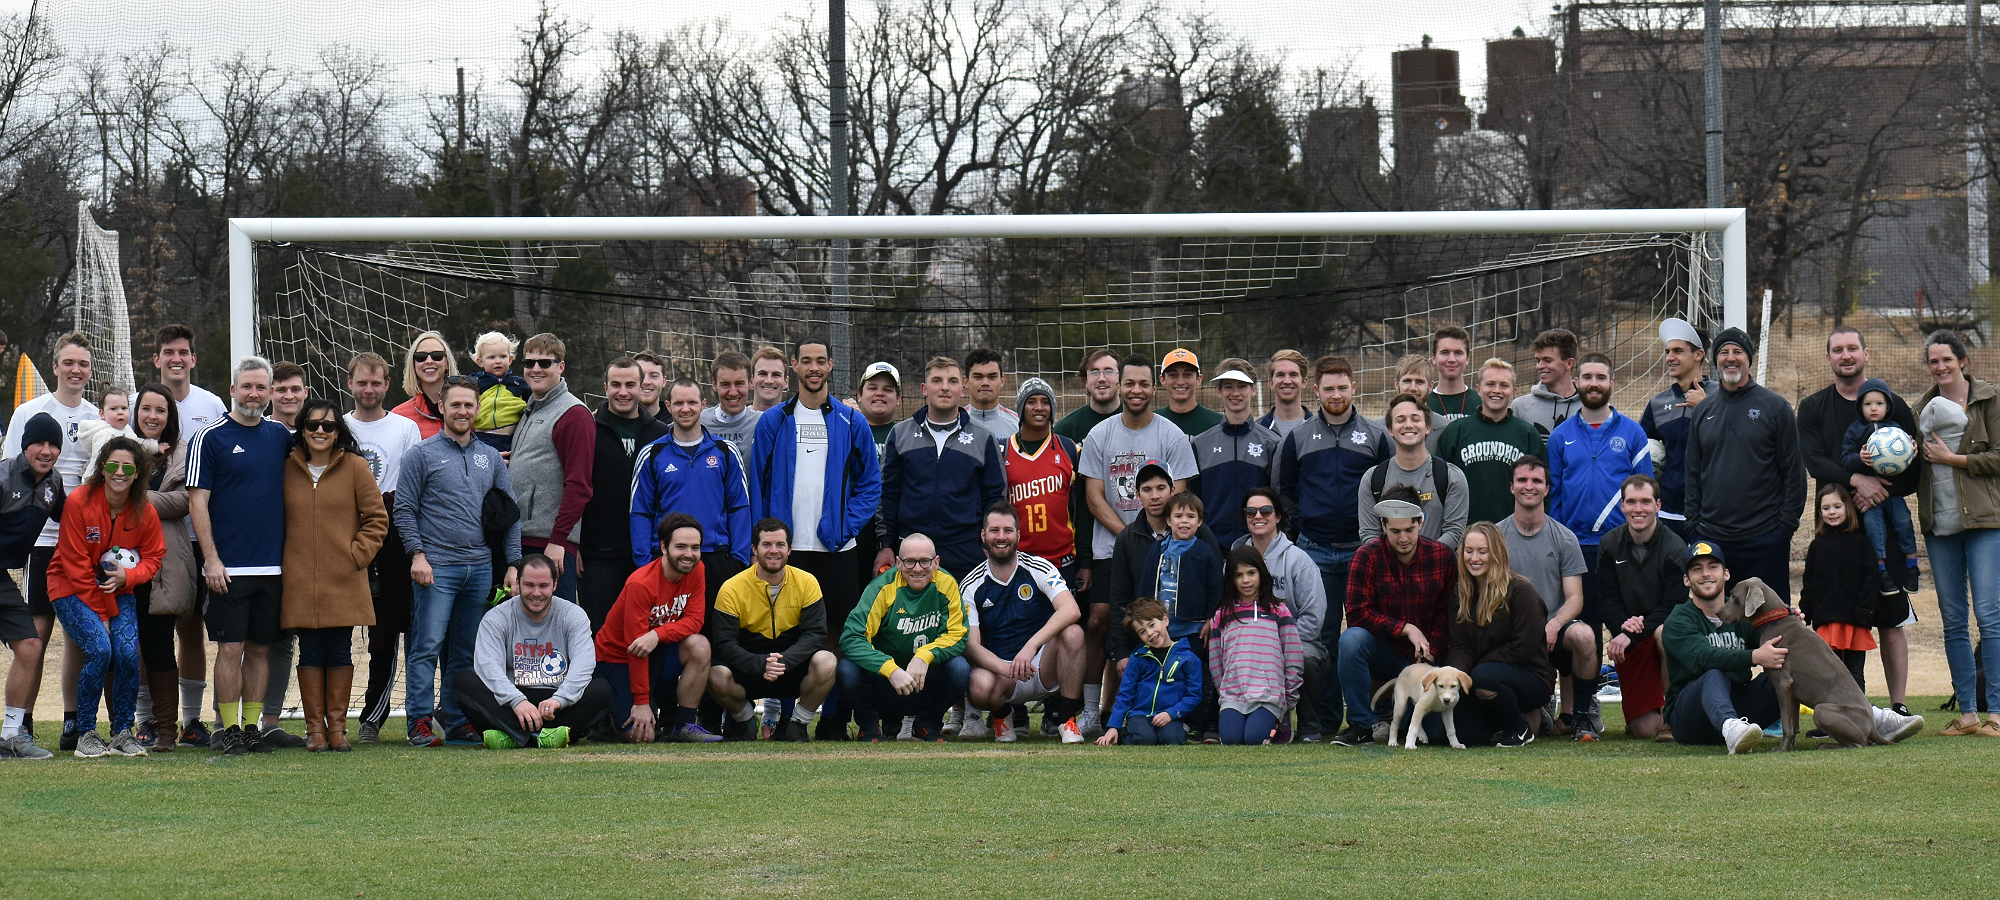 Men's Alumni Soccer Game Reception Slated for February 2 at 6 PM